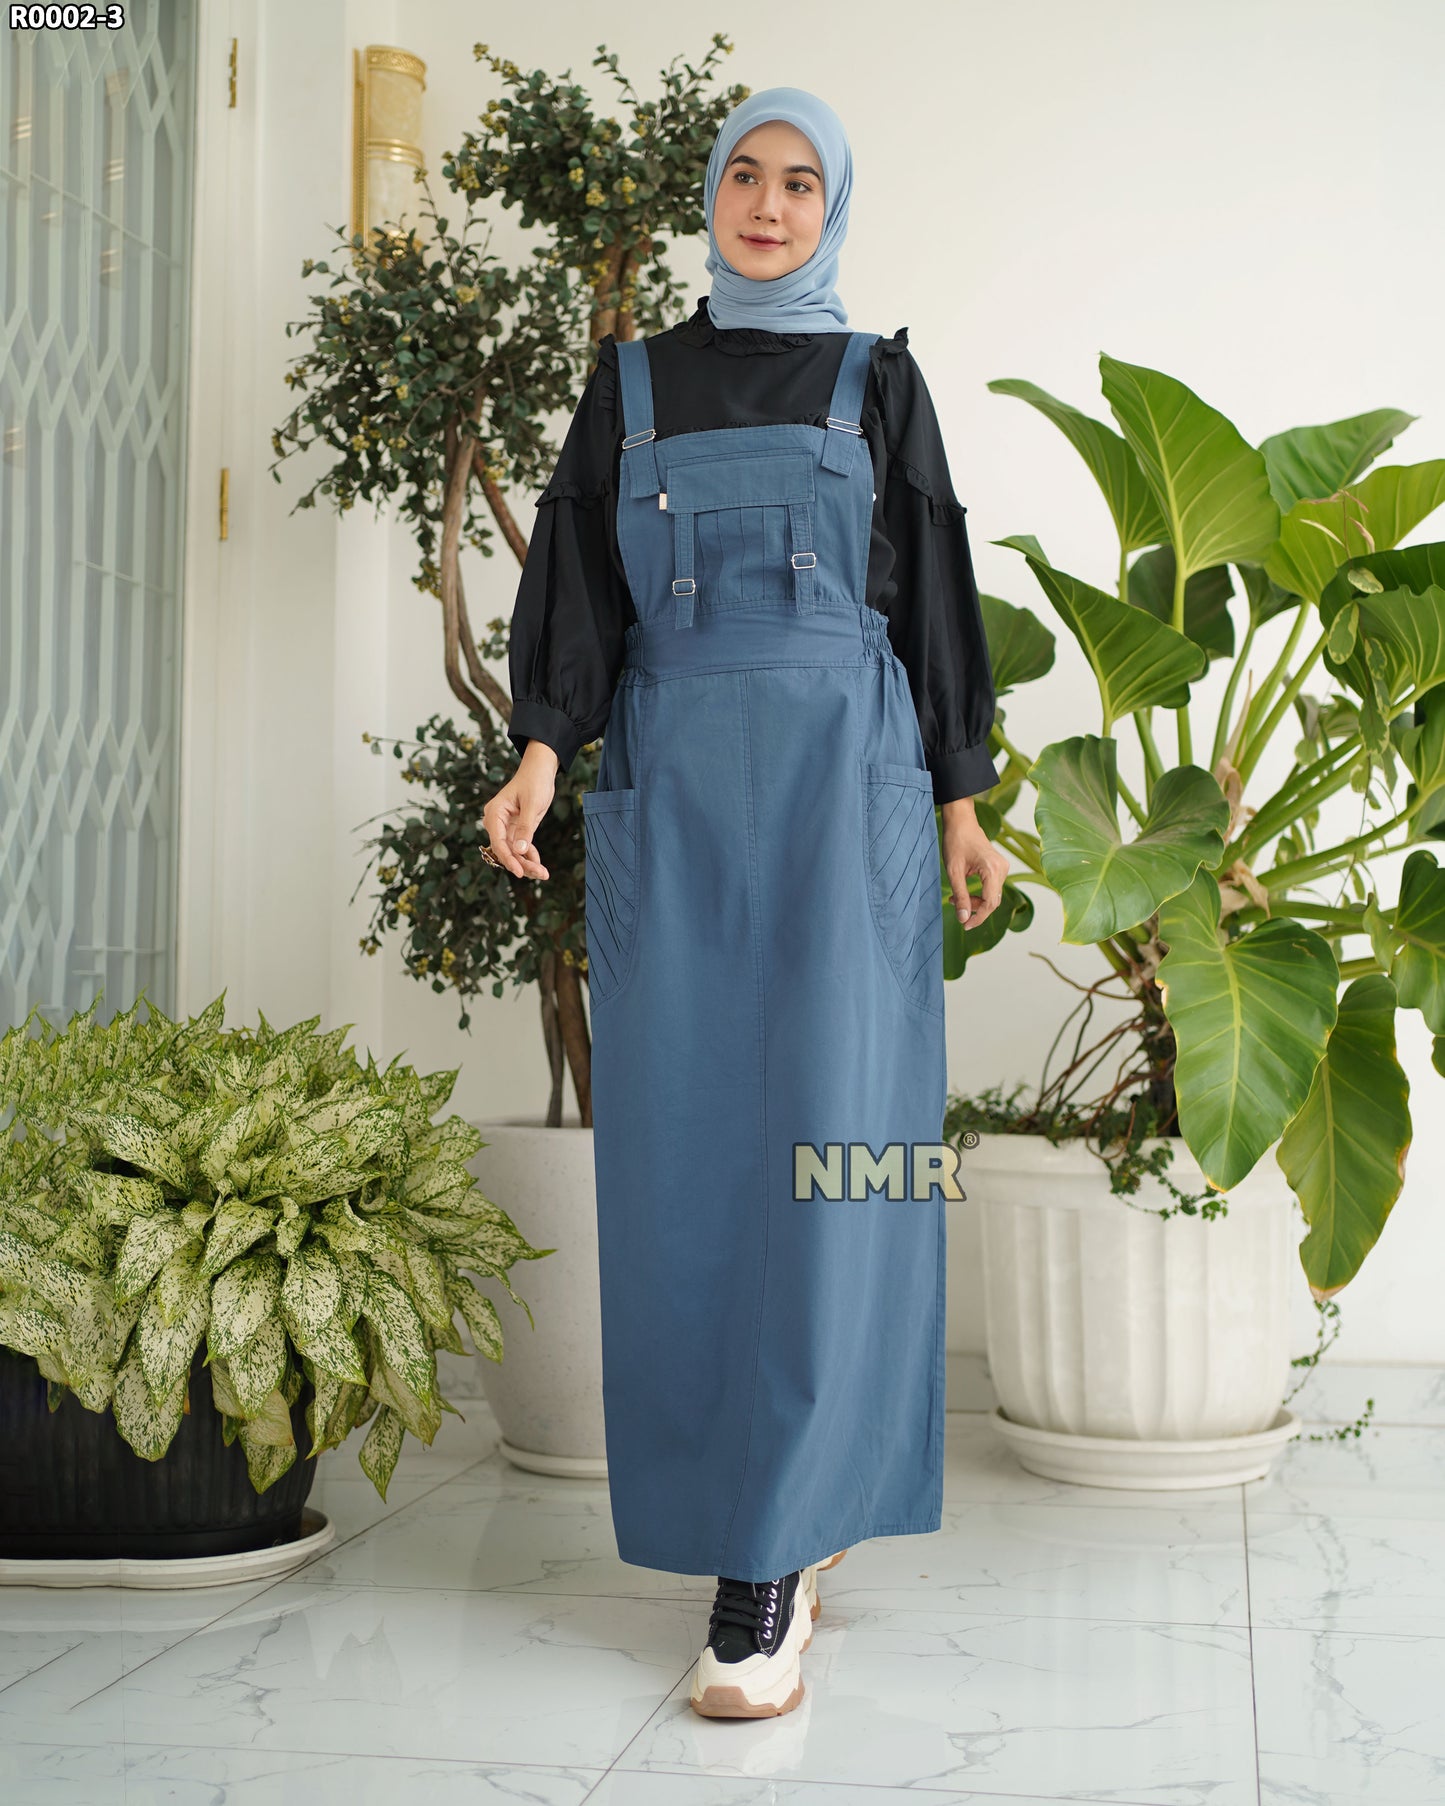 NMR Gamis Jumpsuit Overall Baby Canvas Vol R002-3